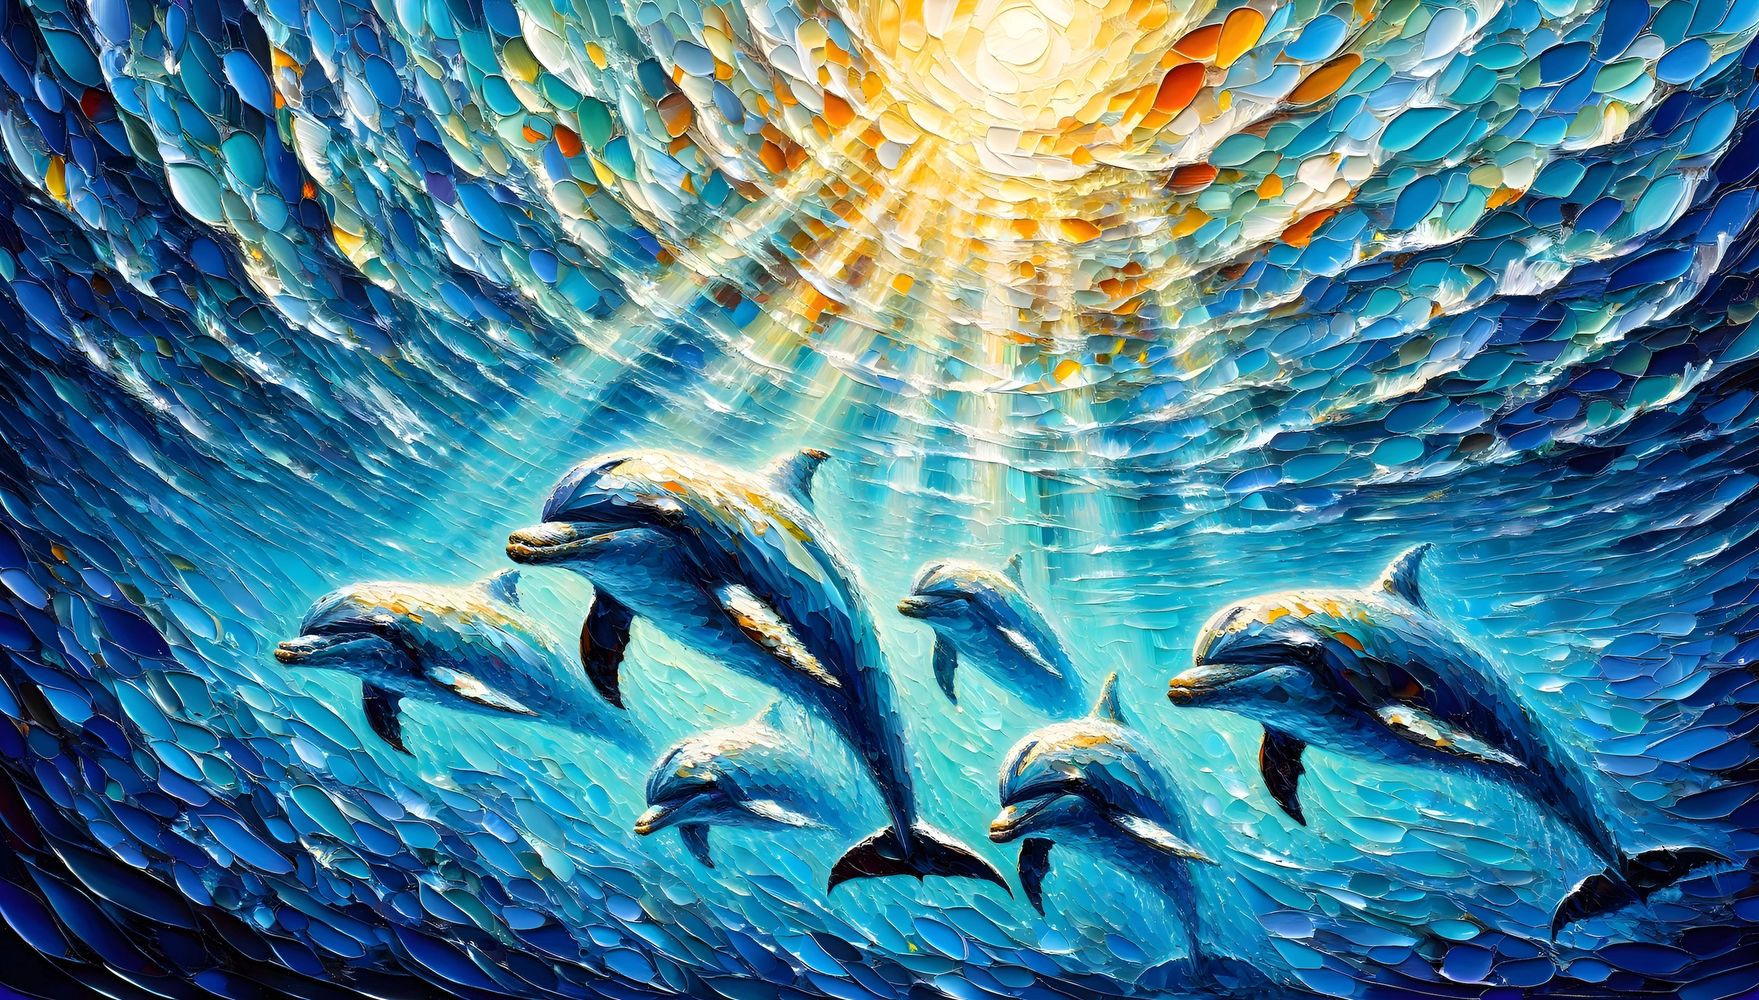 “A Lively Pod” features a small pod of dolphins swimming off the coast of Florida.